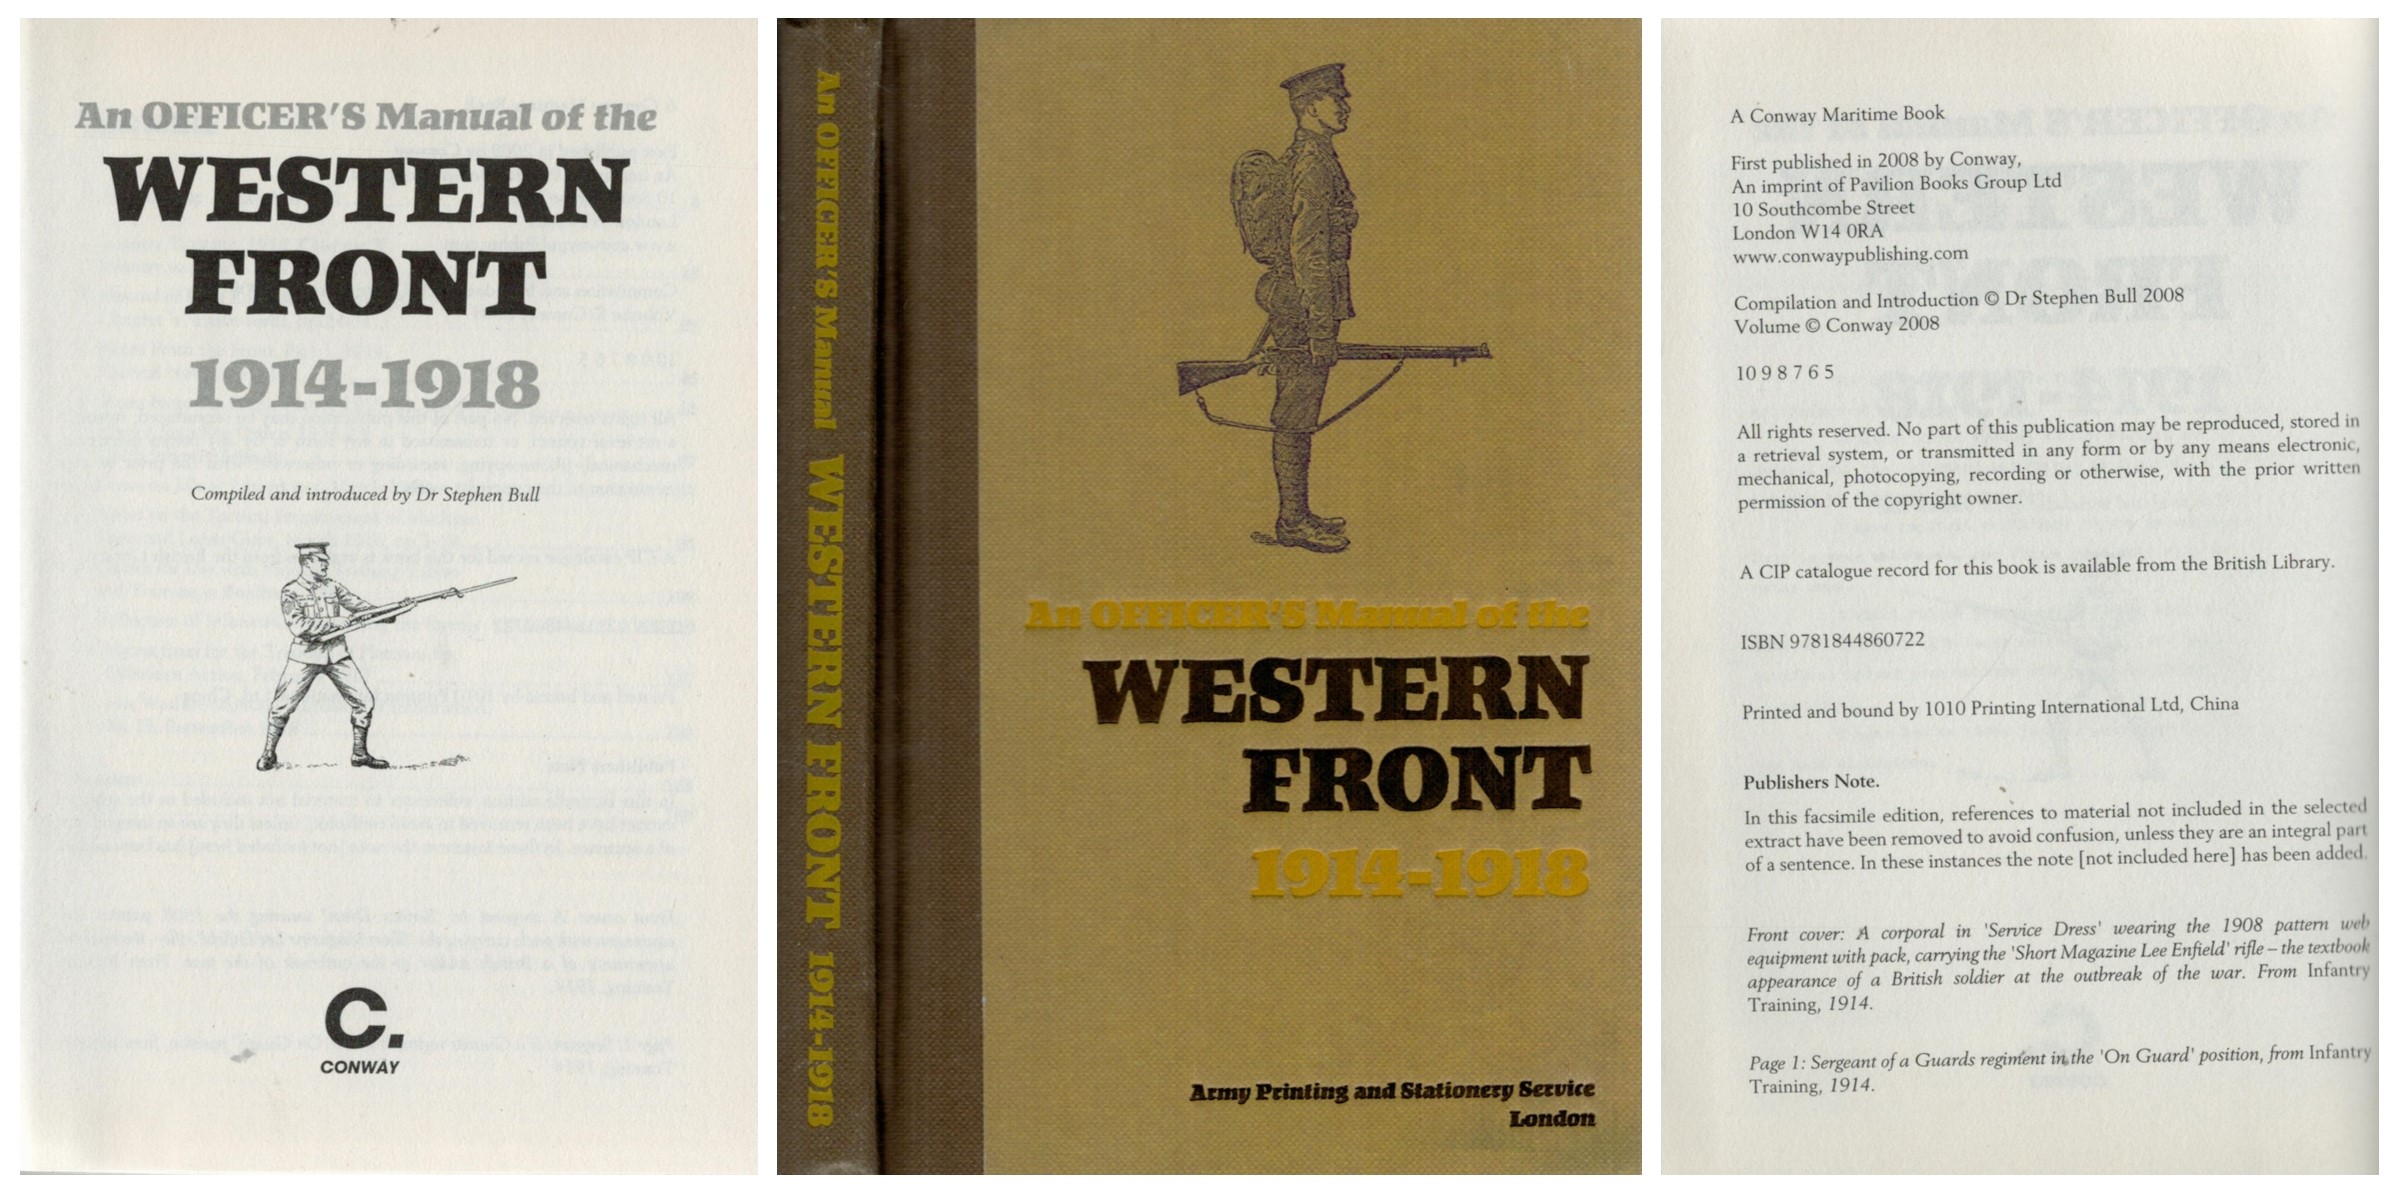 An Officer's Manual of the Western Front 1914-1918 Hardcover book unsigned. Complied and - Image 2 of 3